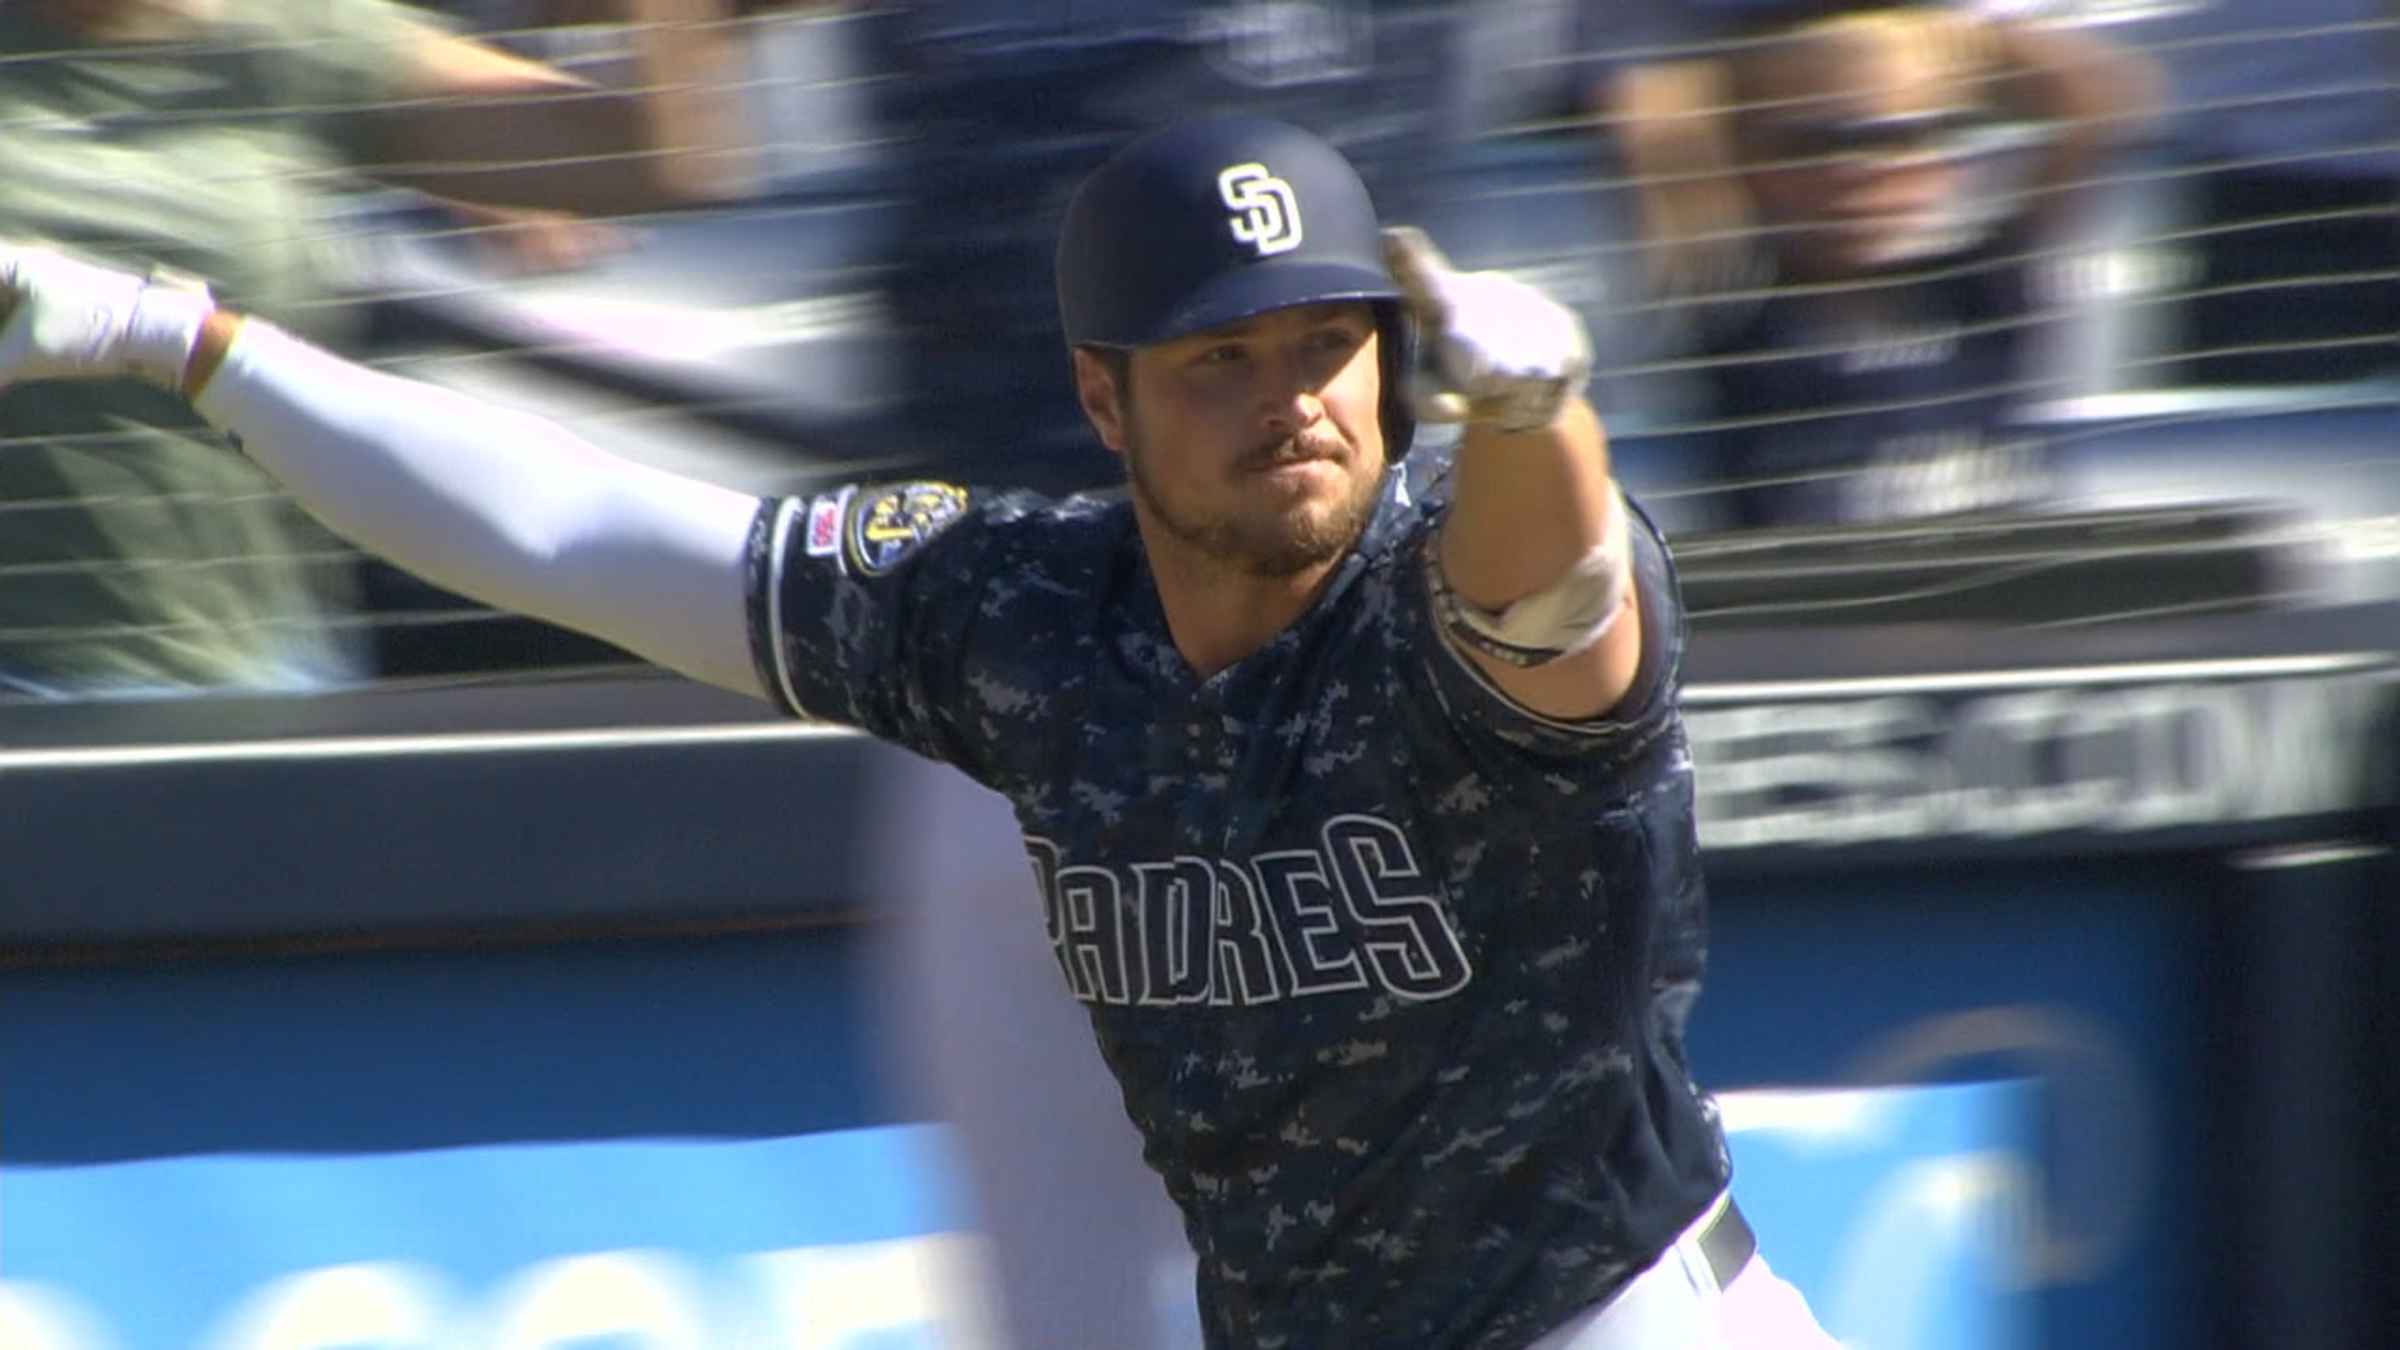 Hunter Renfroe's grand slam launches Padres past Reds